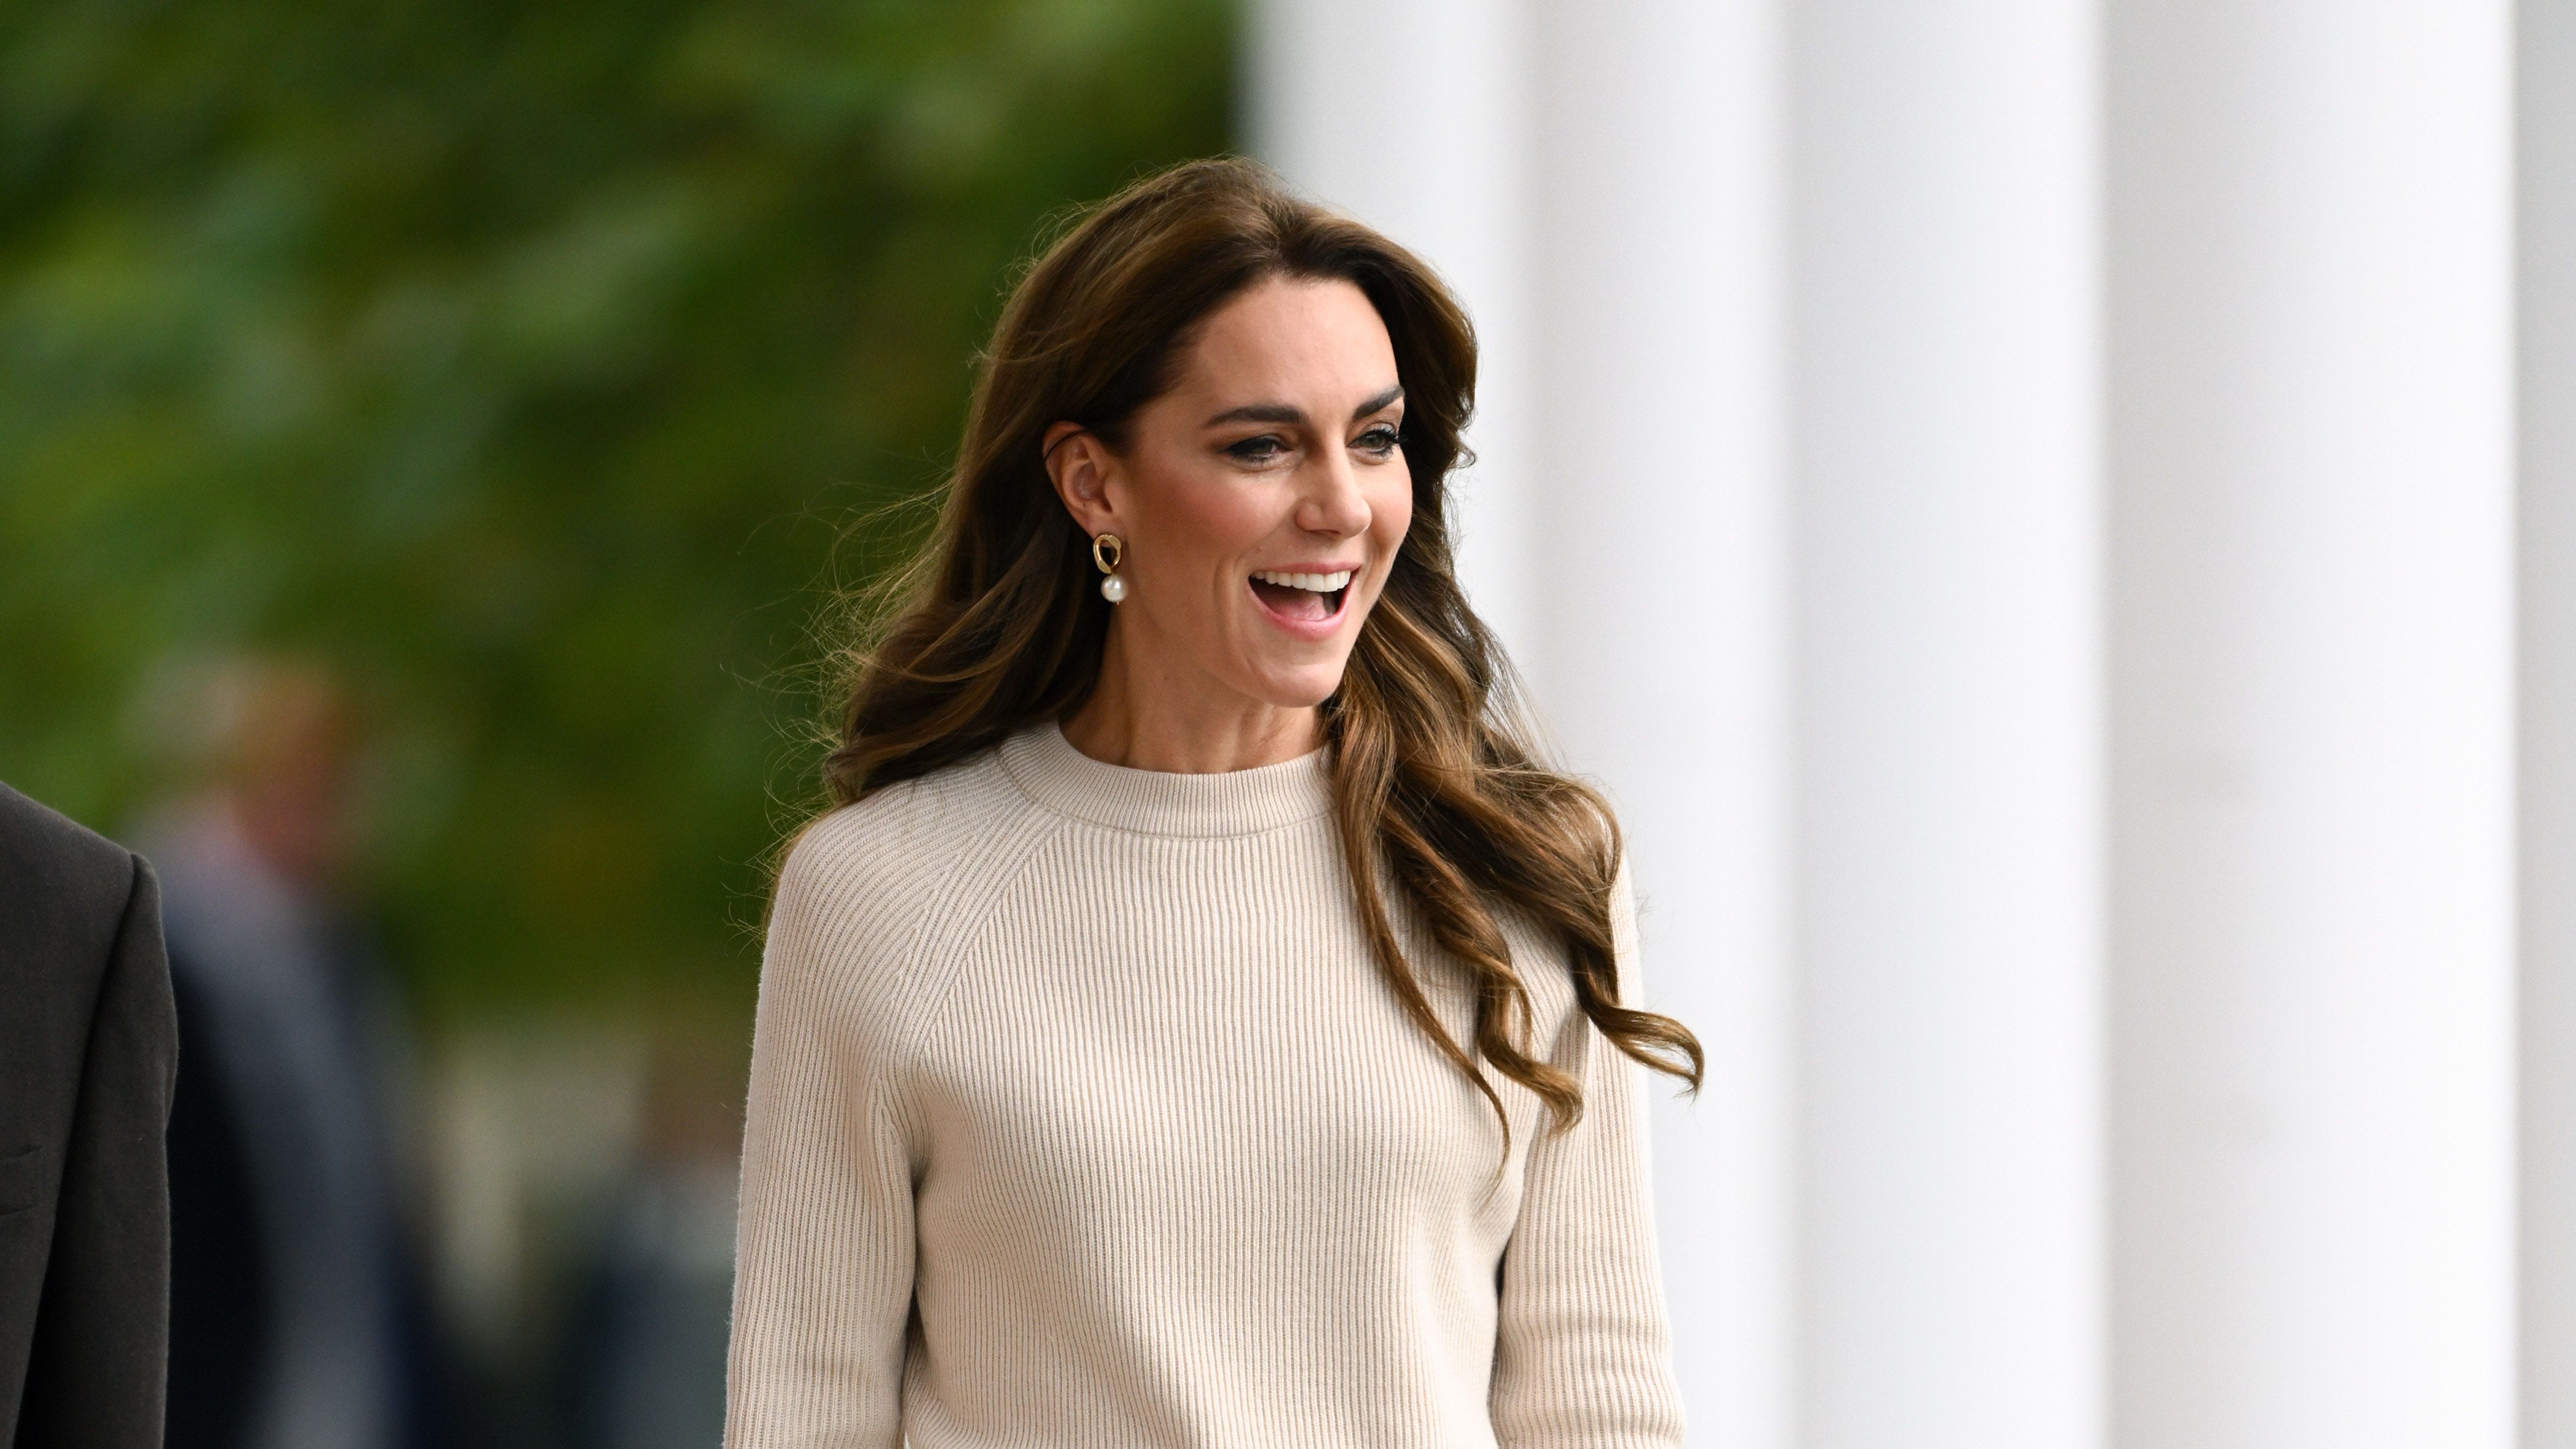 Kate Middleton Carried Her Go-To Top-Handle Bag Style in White